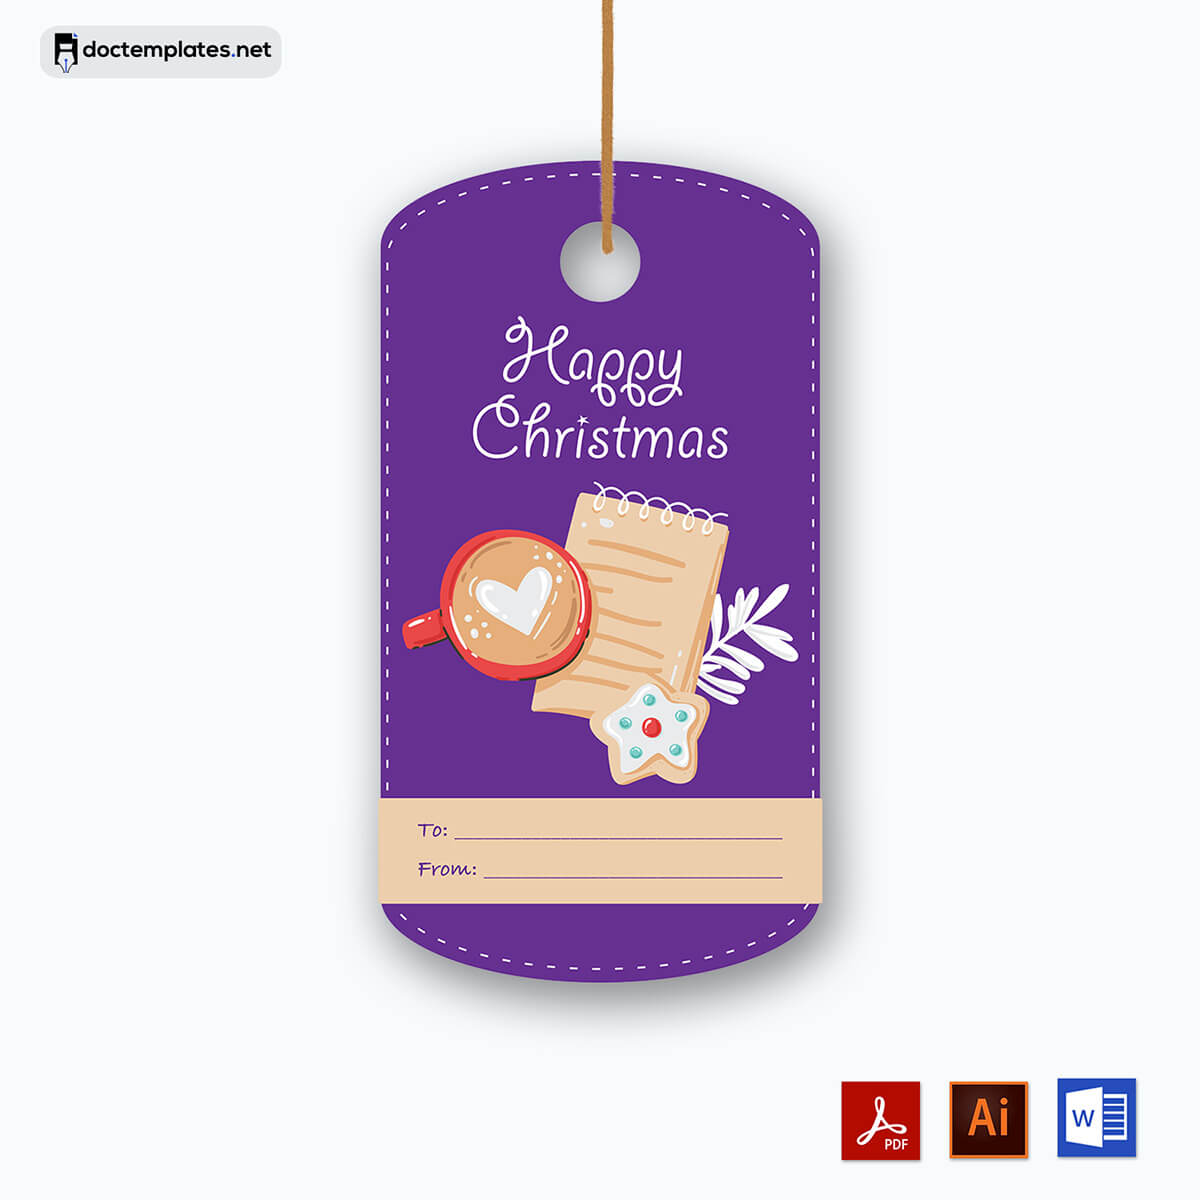 Create Personalized Gift Tags with Adobe Illustrator Templates